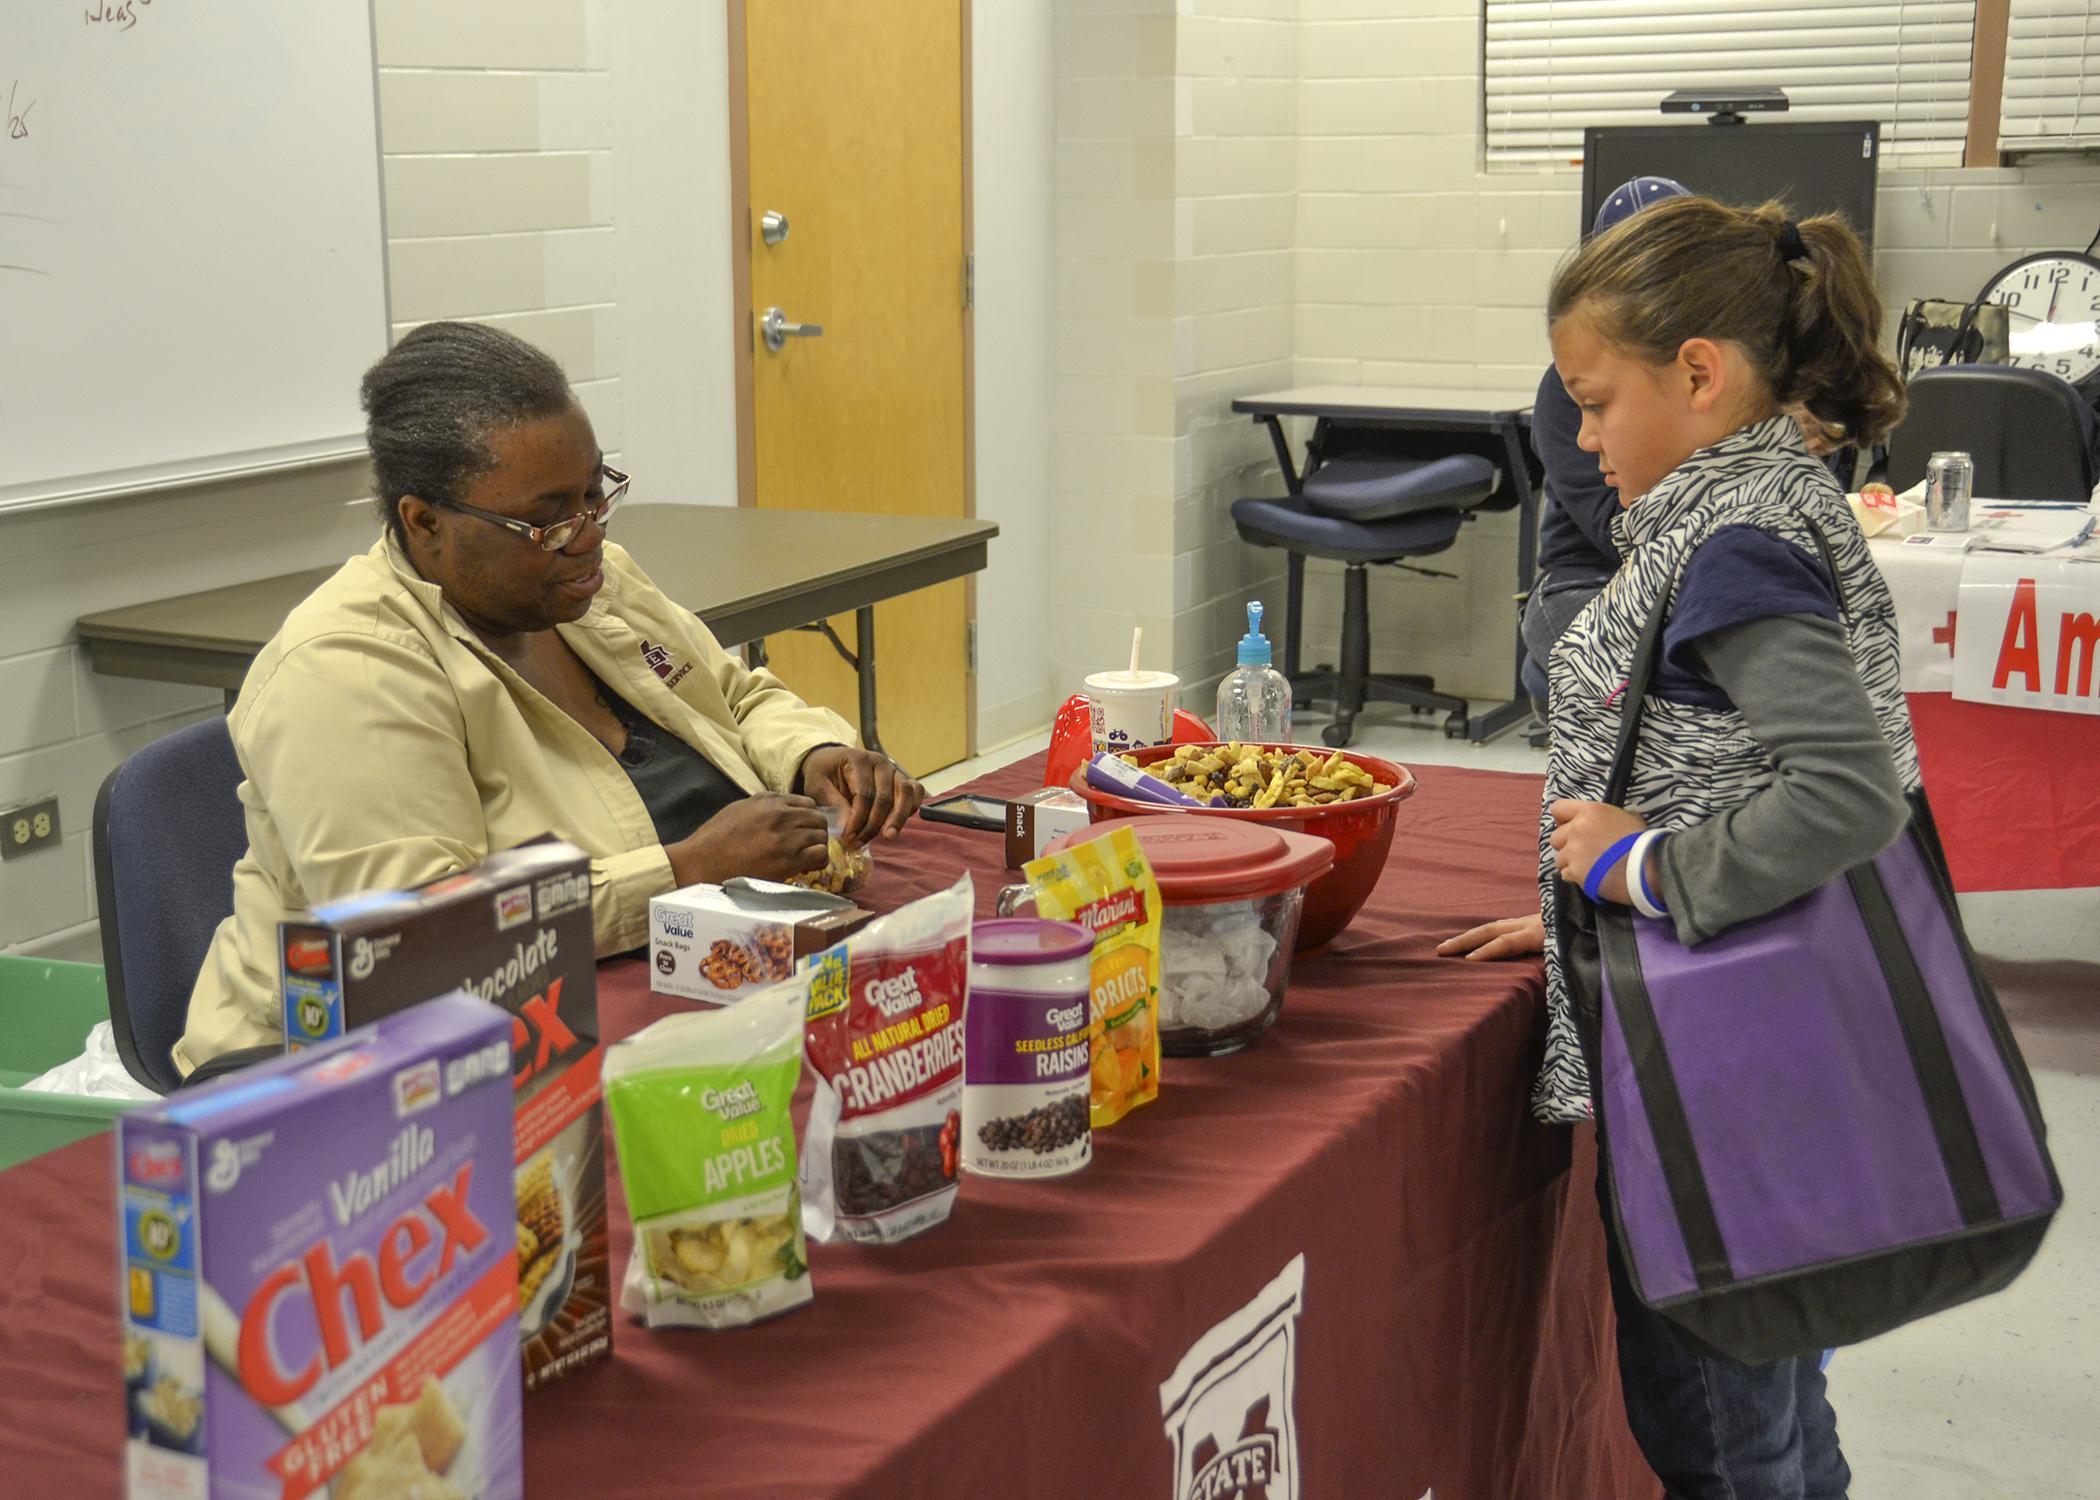 Mississippi State University Extension Service Child and Family Development agent Terri Thompson, left, gives Isabella Cornish a sample of an easy-to-make snack mix. The MSU Extension Service was one of several organizations participating in the Super Saturday healthy cooking event in Pascagoula, Mississippi on Nov. 15, 2014. (Photo by MSU Extension Service/Susan Collins-Smith)